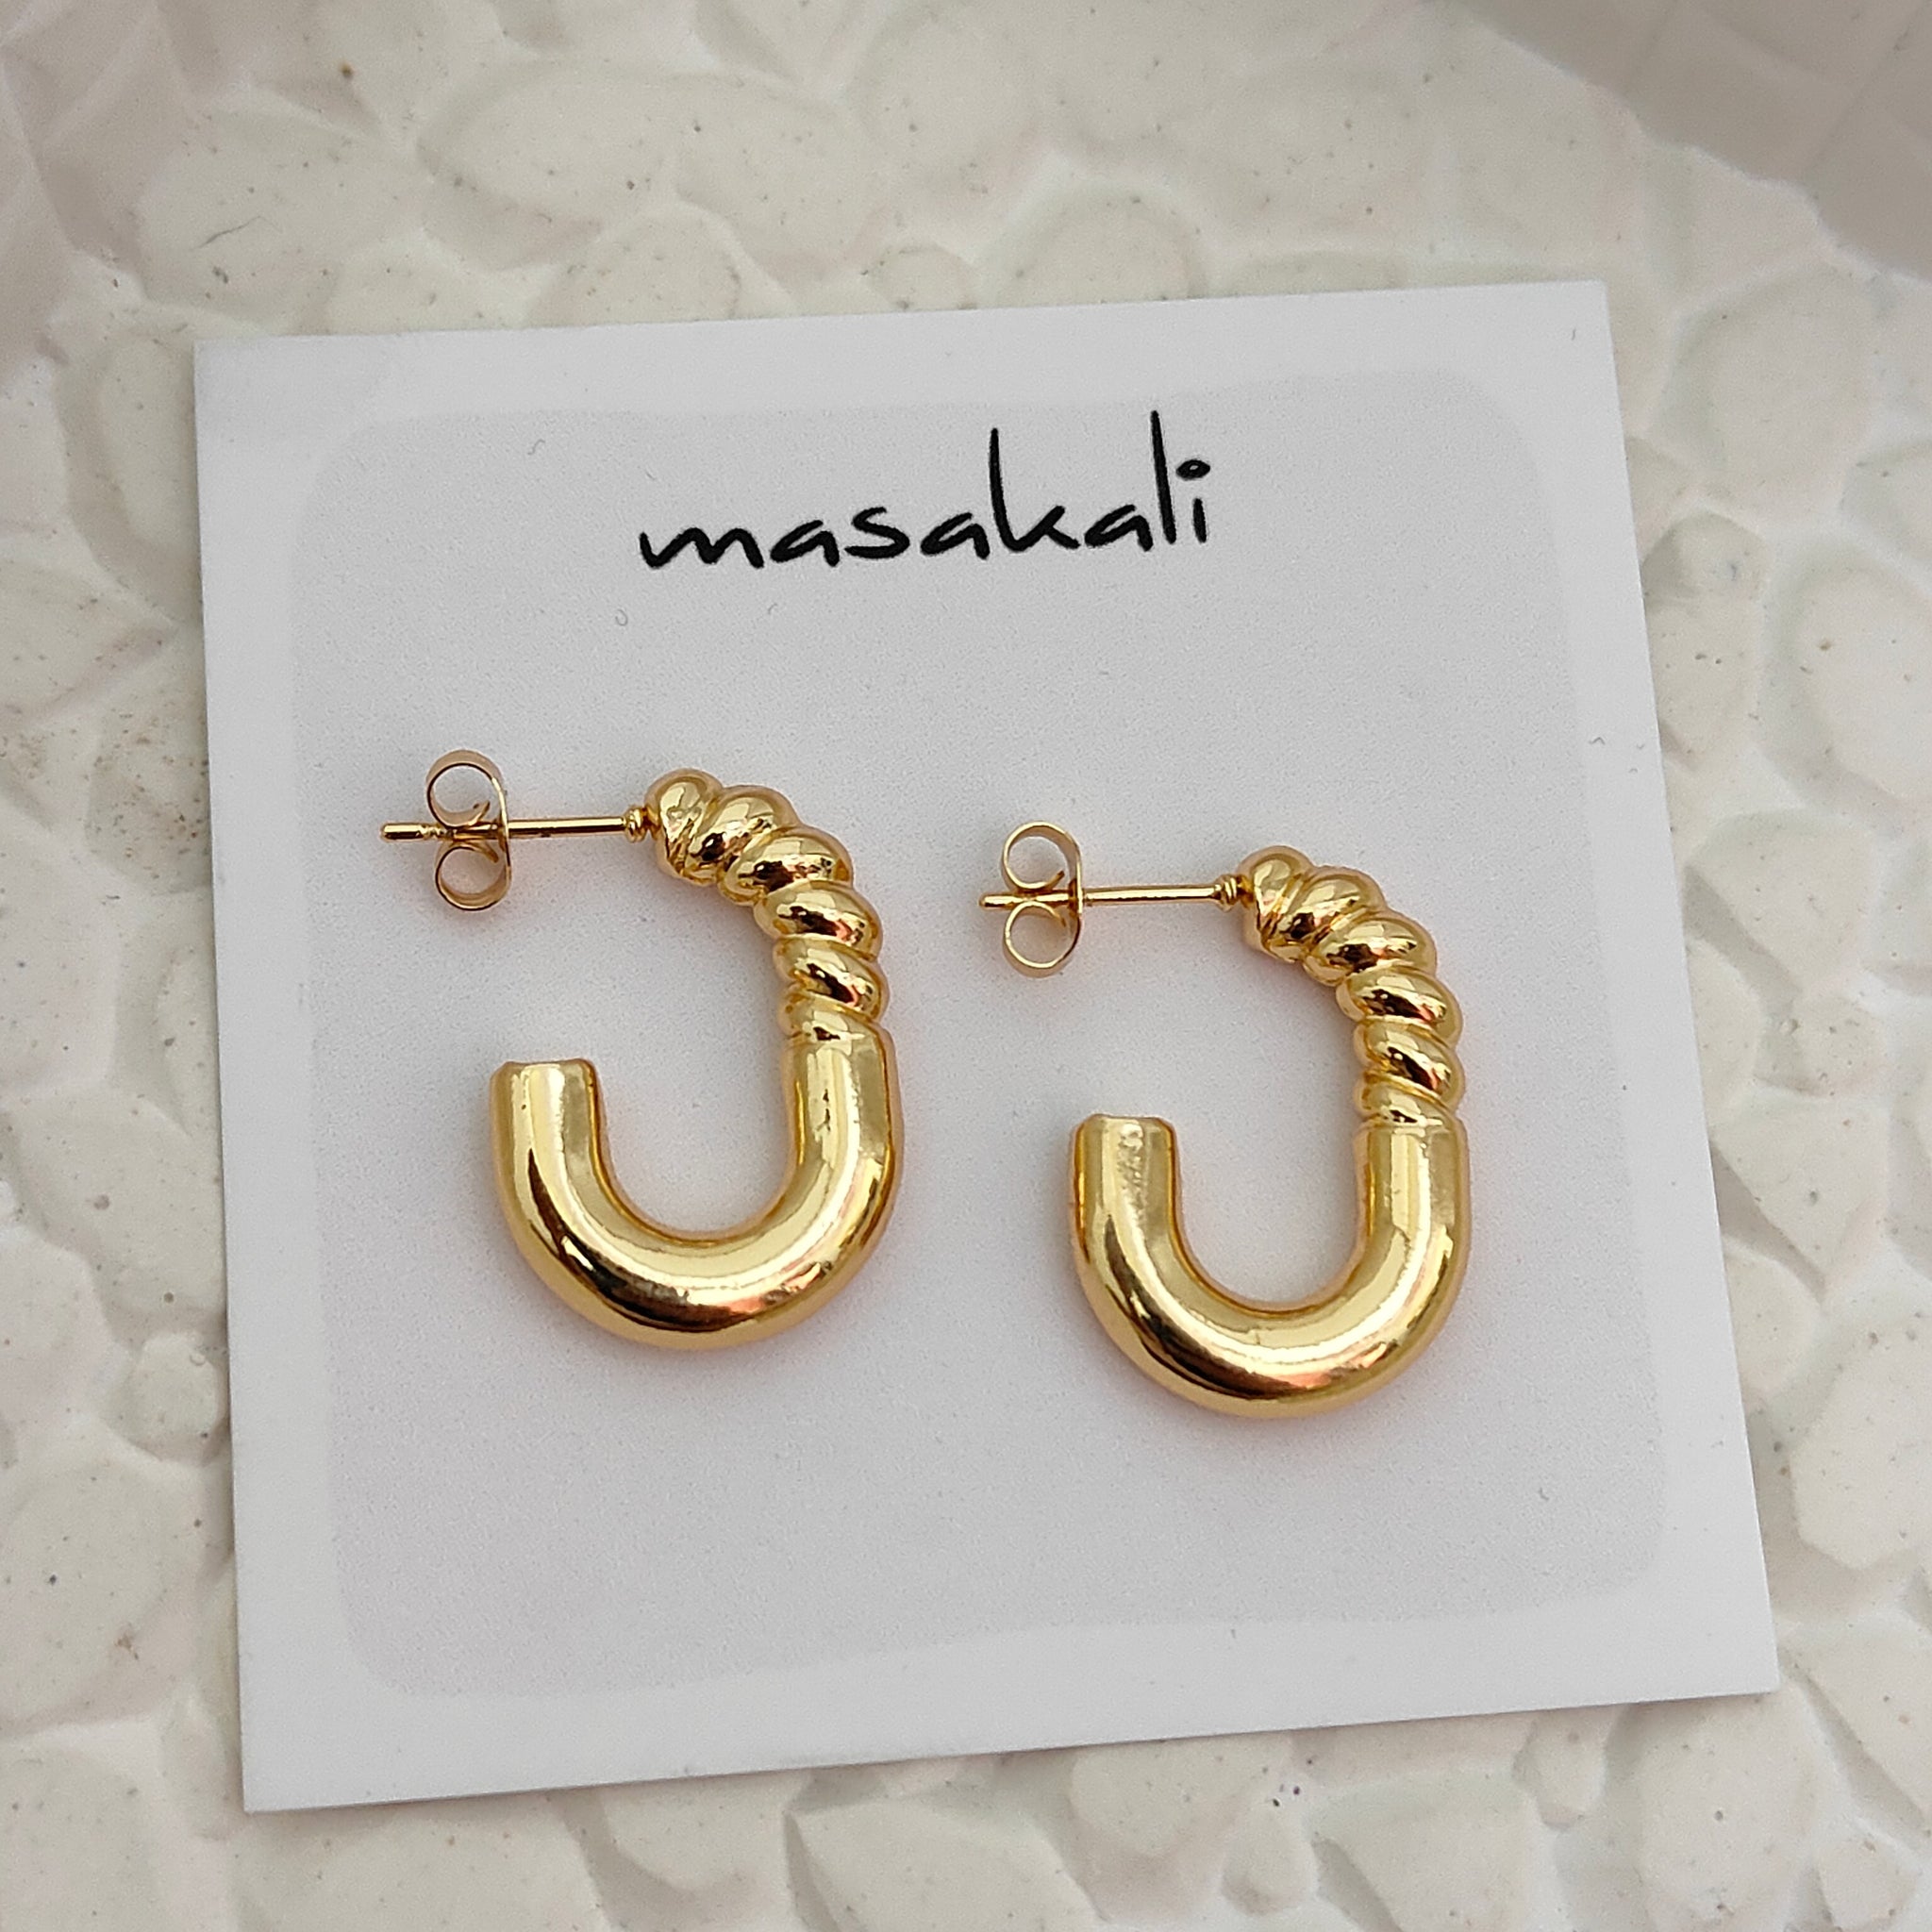 Hip Hop Chunky Earrings, Stainless Steel, Gold-toned Hoops